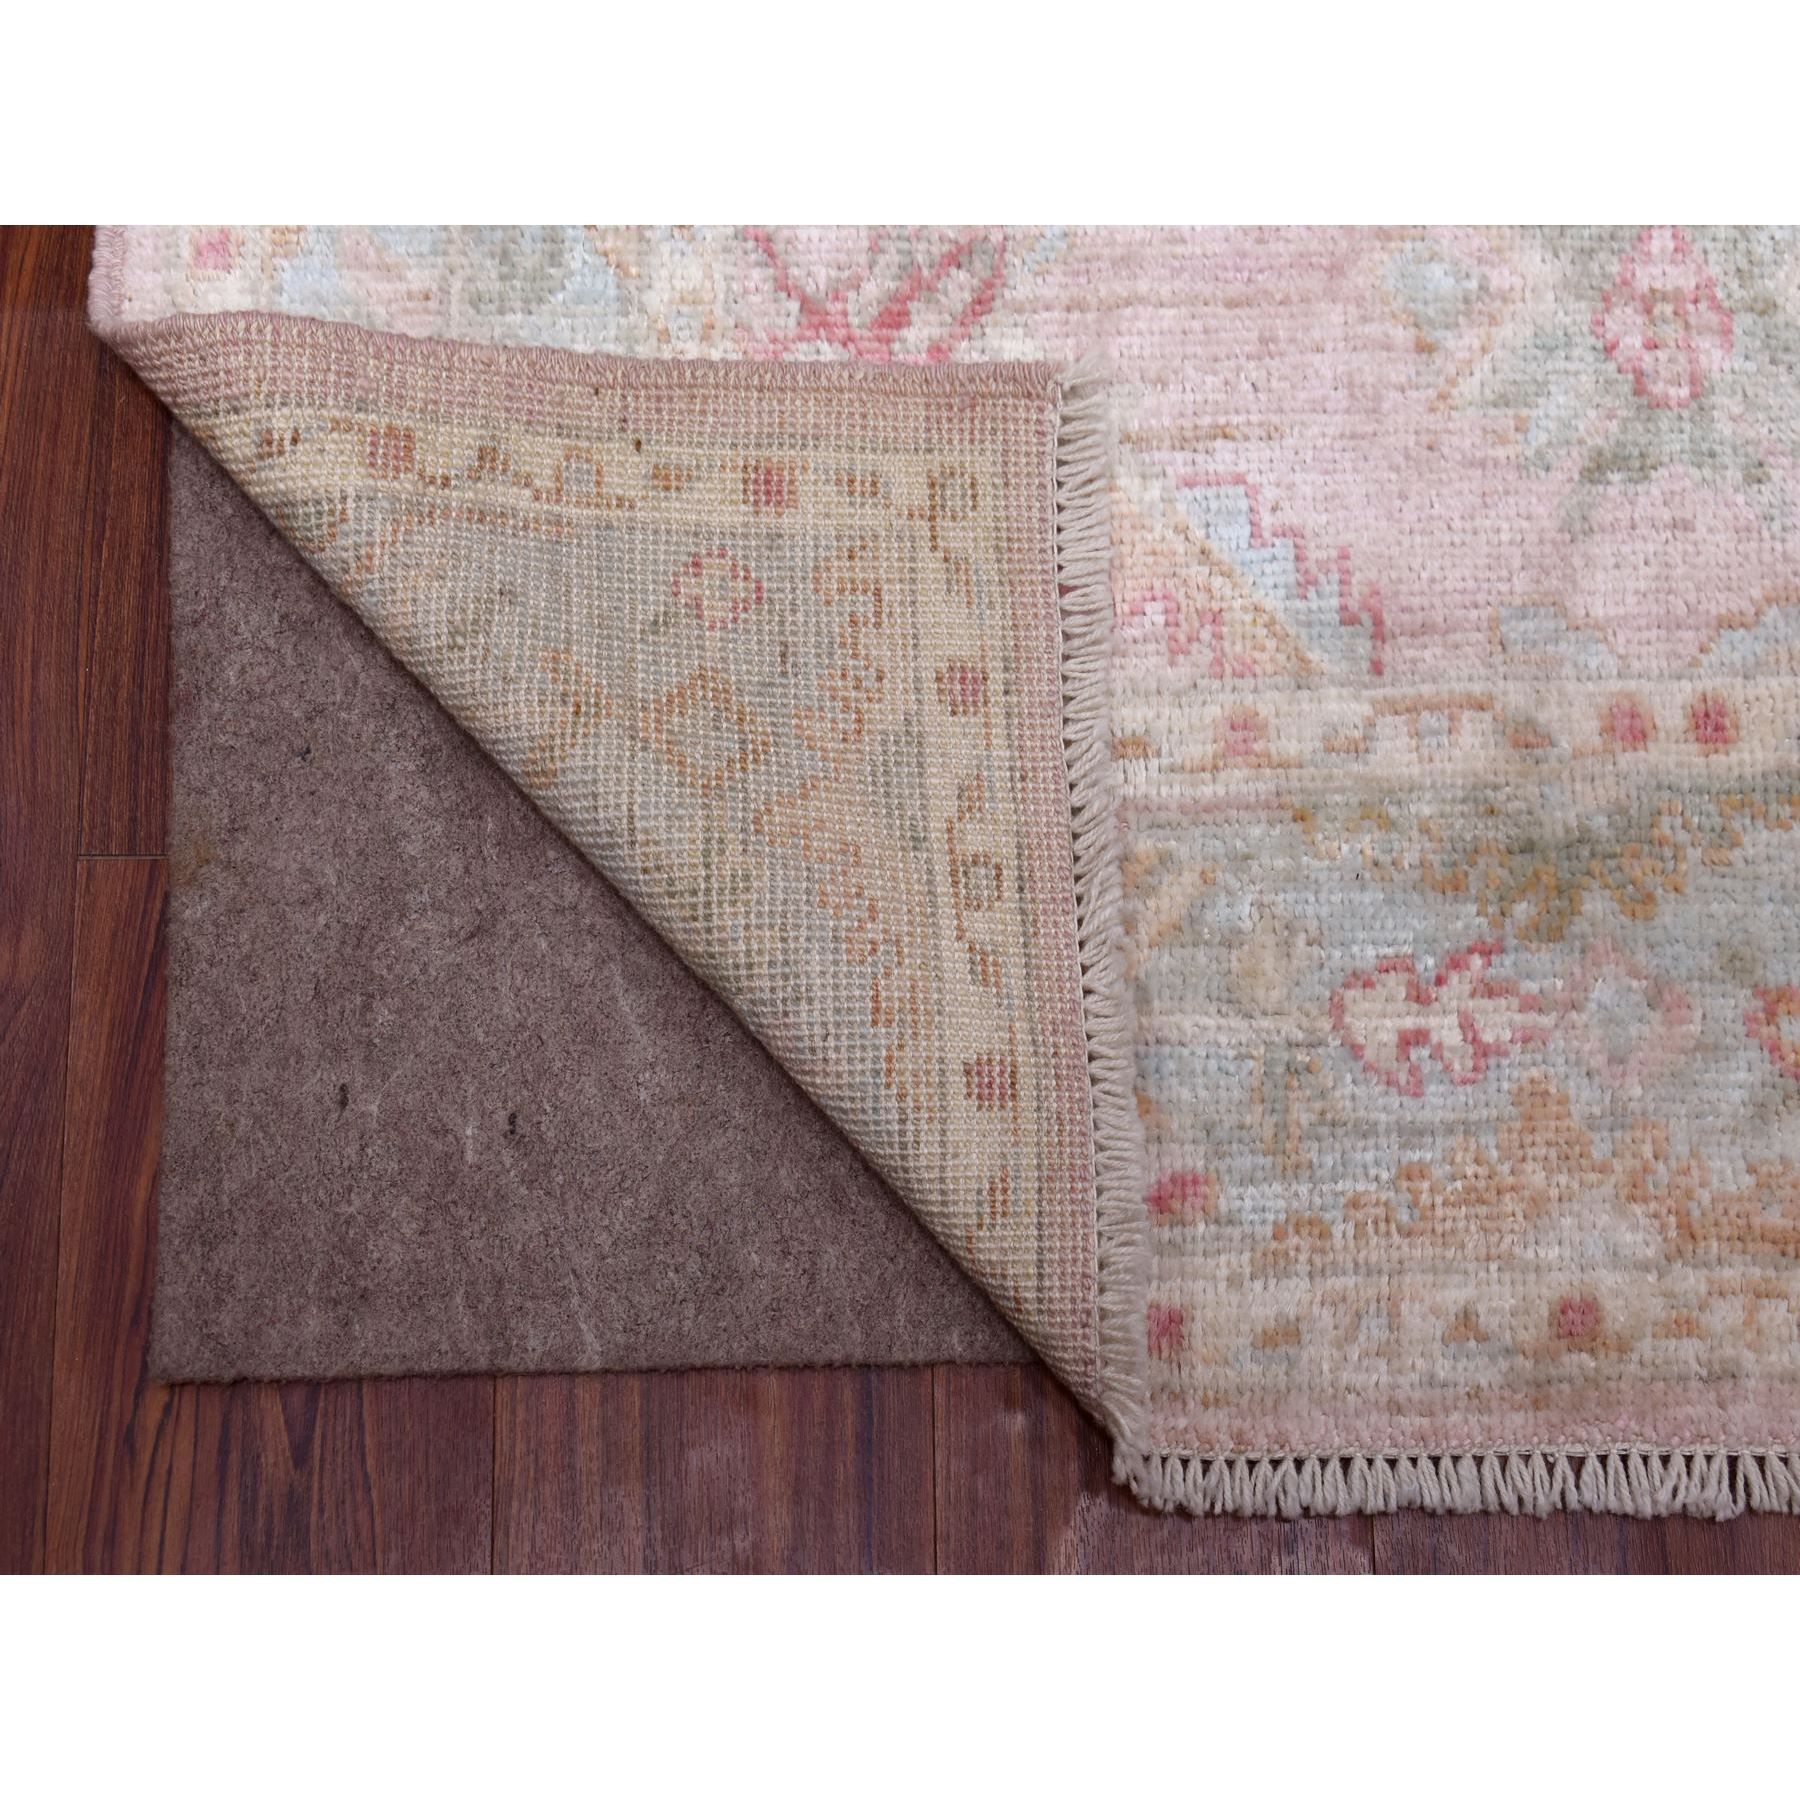 4'x5'10" Pure Wool Hand Woven Soft Pink Angora Ushak With A Beautiful, Color Pattern Oriental Rug 